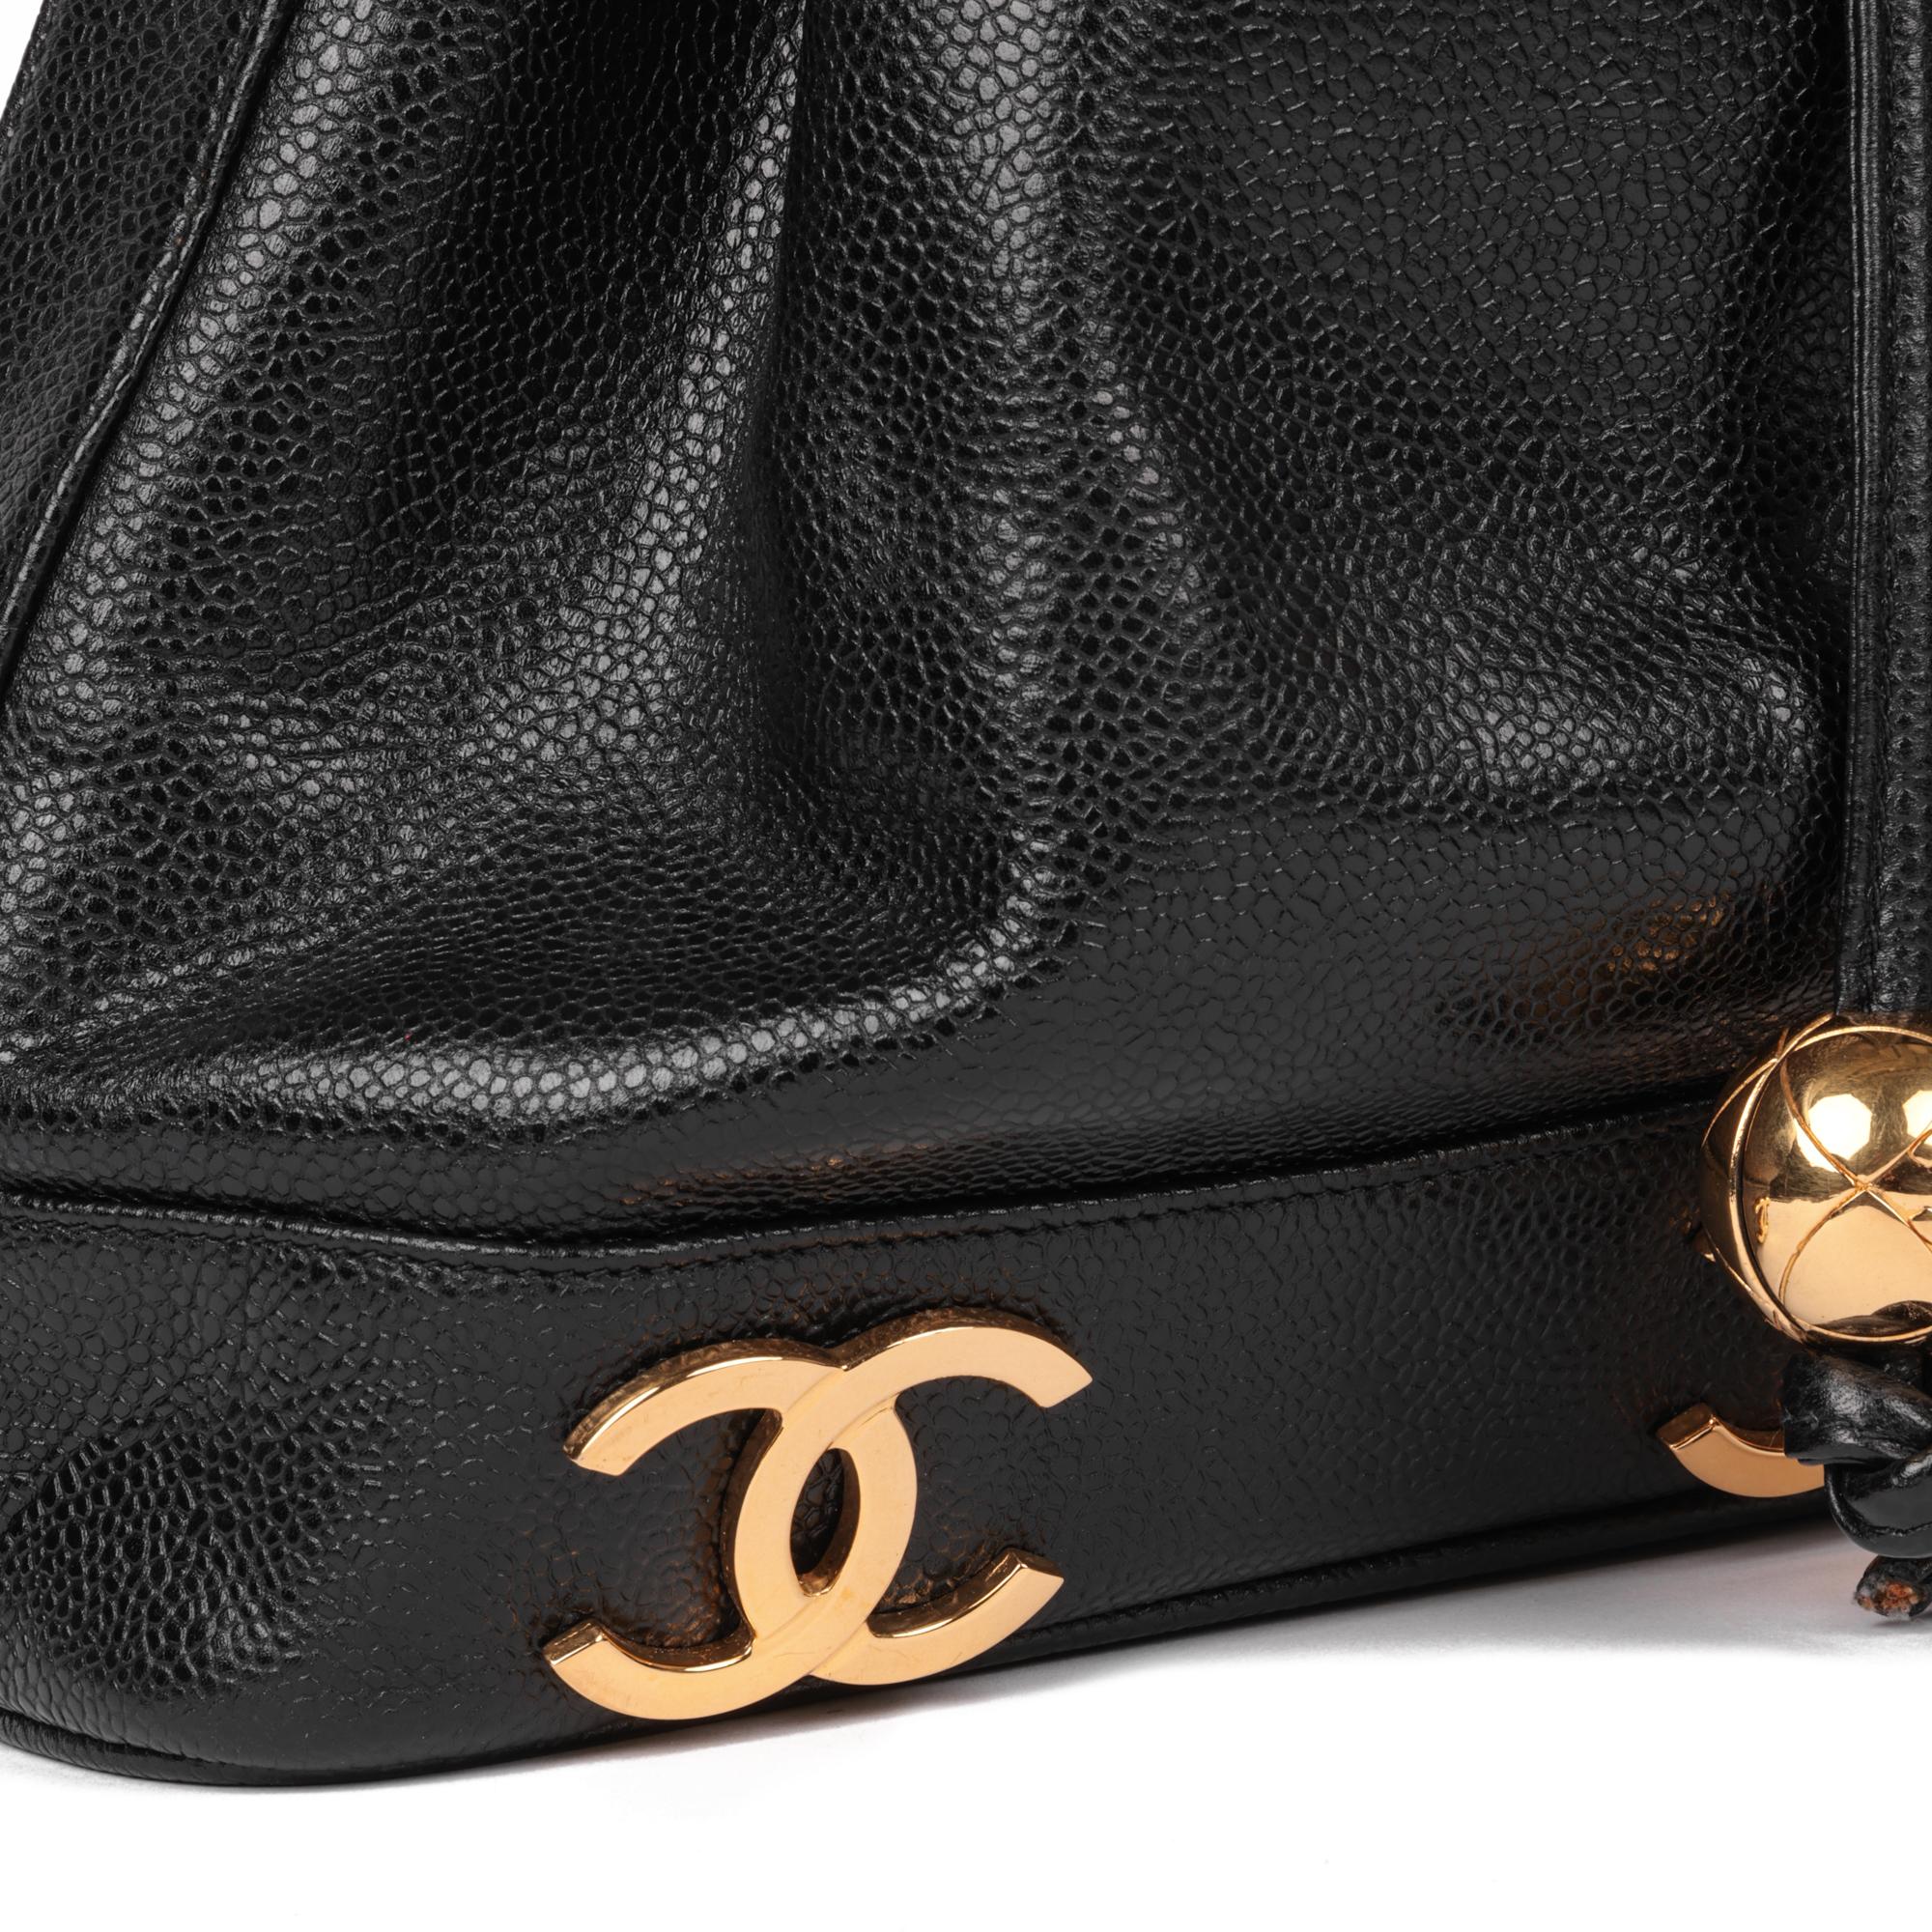 CHANEL Black Caviar Leather Vintage Classic Logo Trim Bucket Bag with Pouch For Sale 3